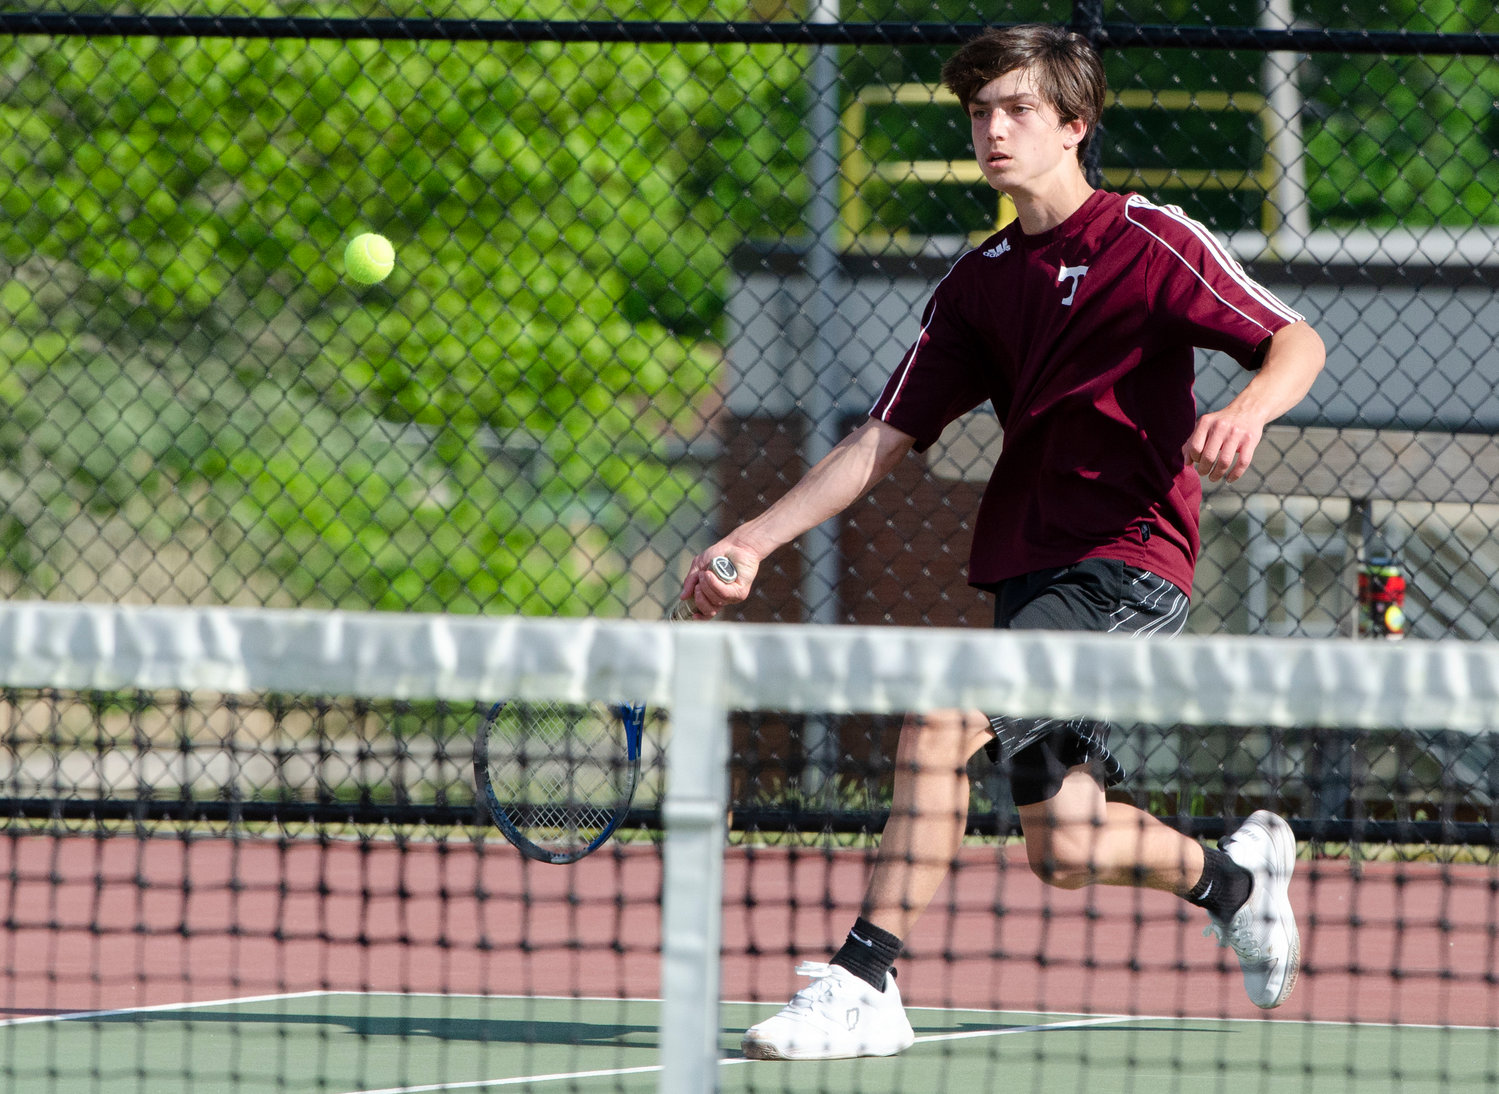 Third singles player Ben Pacheco beat Falcons' Jack Diorio, 6-1, 6-1, during their match.